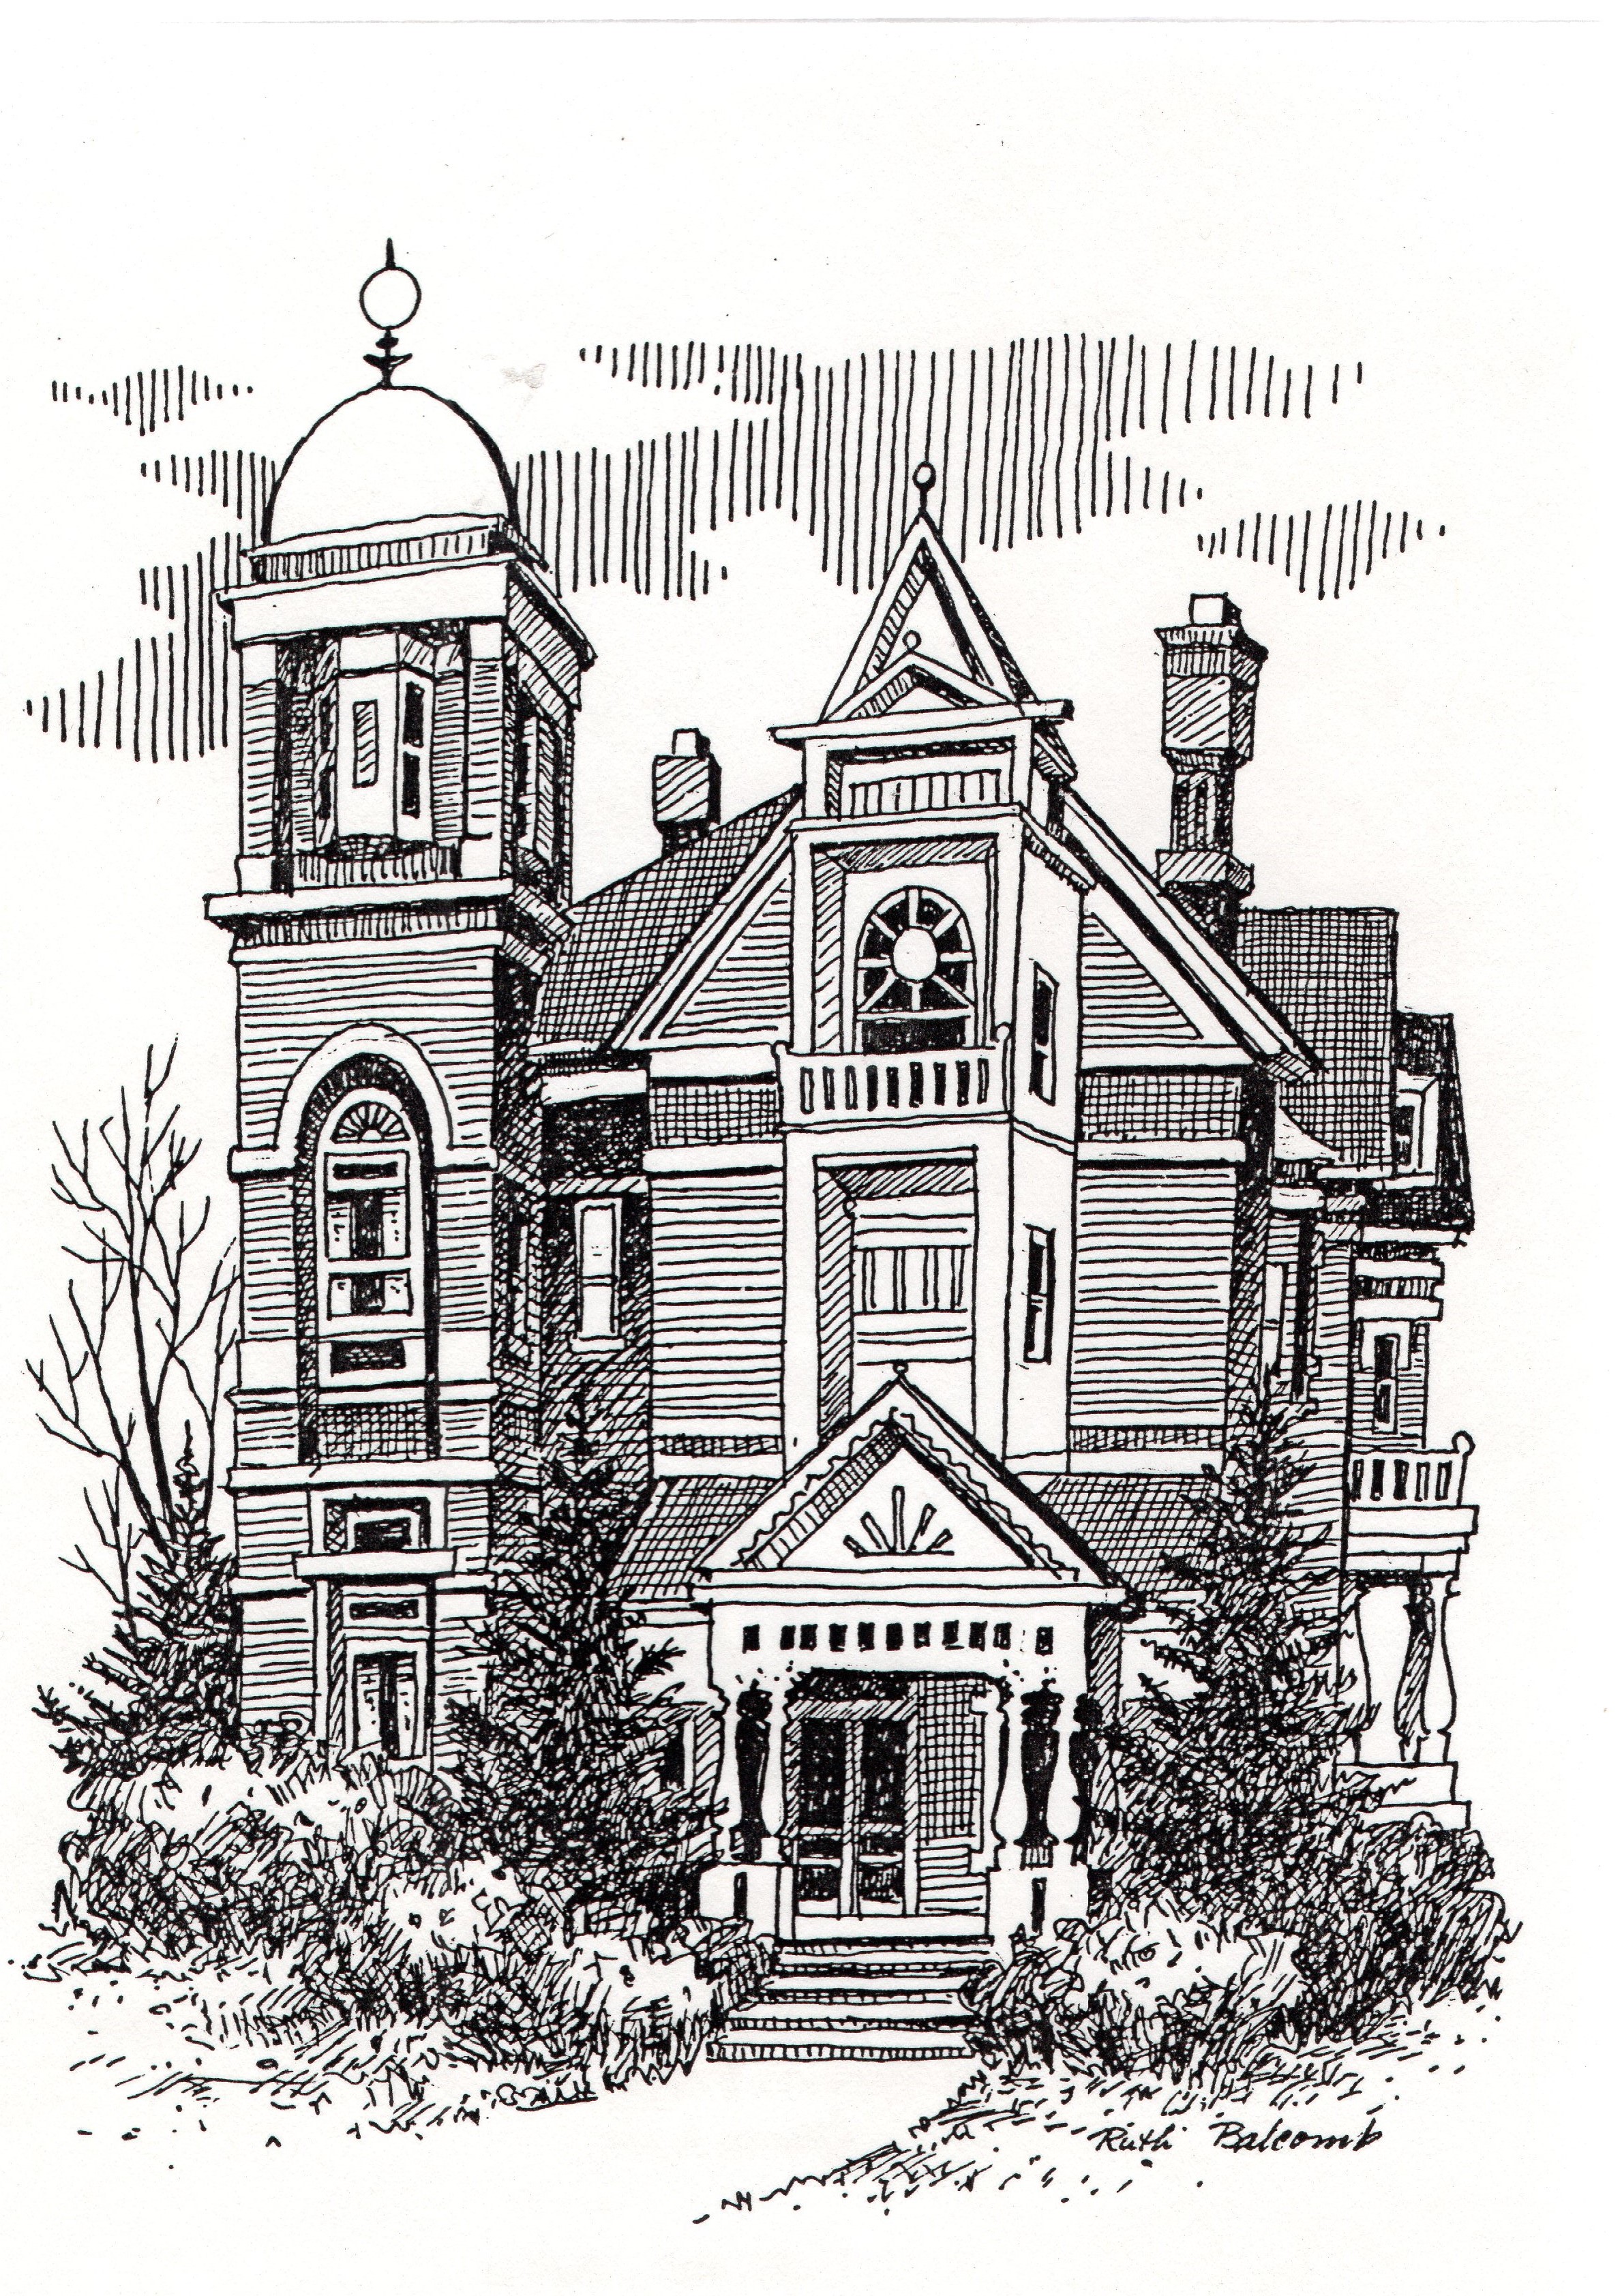 Drawing by Ruth Balcomb  (South Main Street Collection)